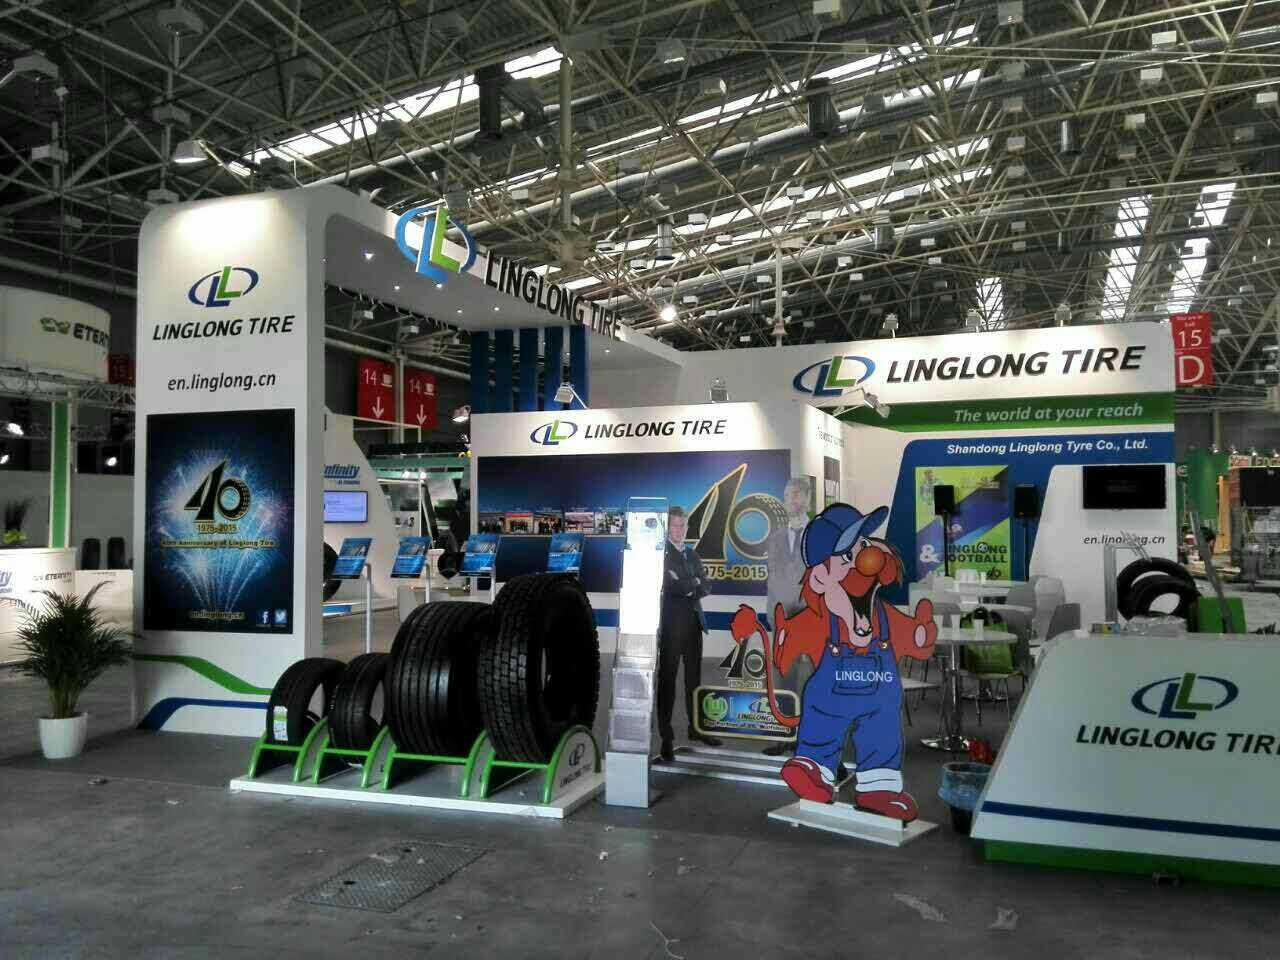 Wolfsburg footballers ‘appear’ on Linglong’s anniversary stand